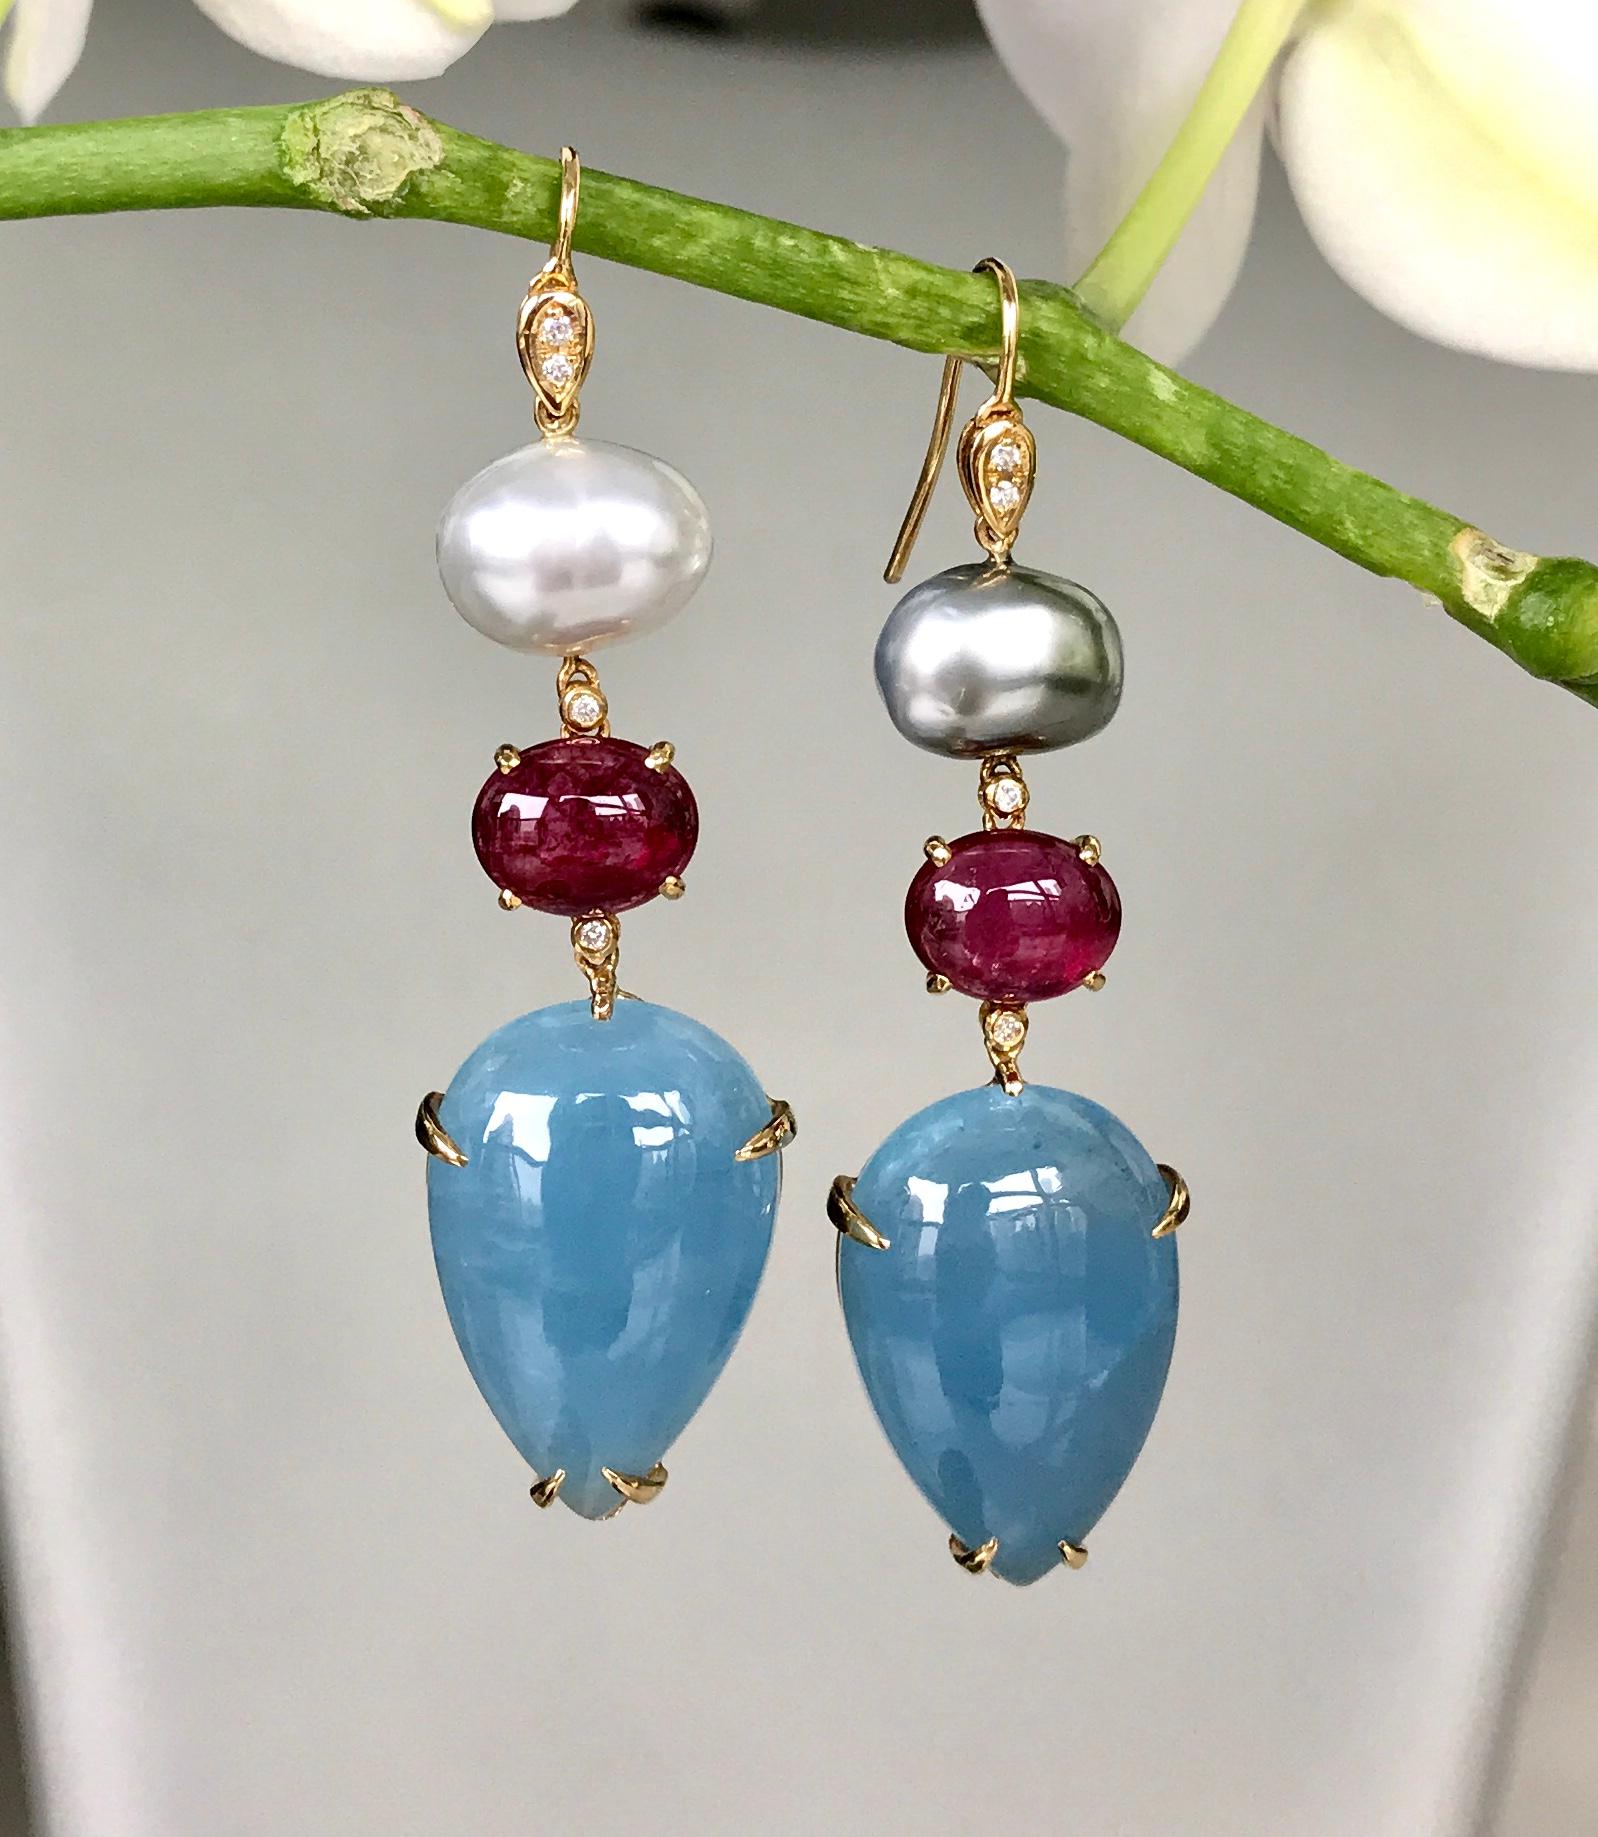 Joon Han one-of-a-kind dangle earrings of South Sea and Tahitian cream and grey keshi pearls, cabochon rubellite tourmalines, fancy cabochon aquamarine drops, and diamonds. Handcrafted in 18K yellow gold, these luminescent earrings are a chic and